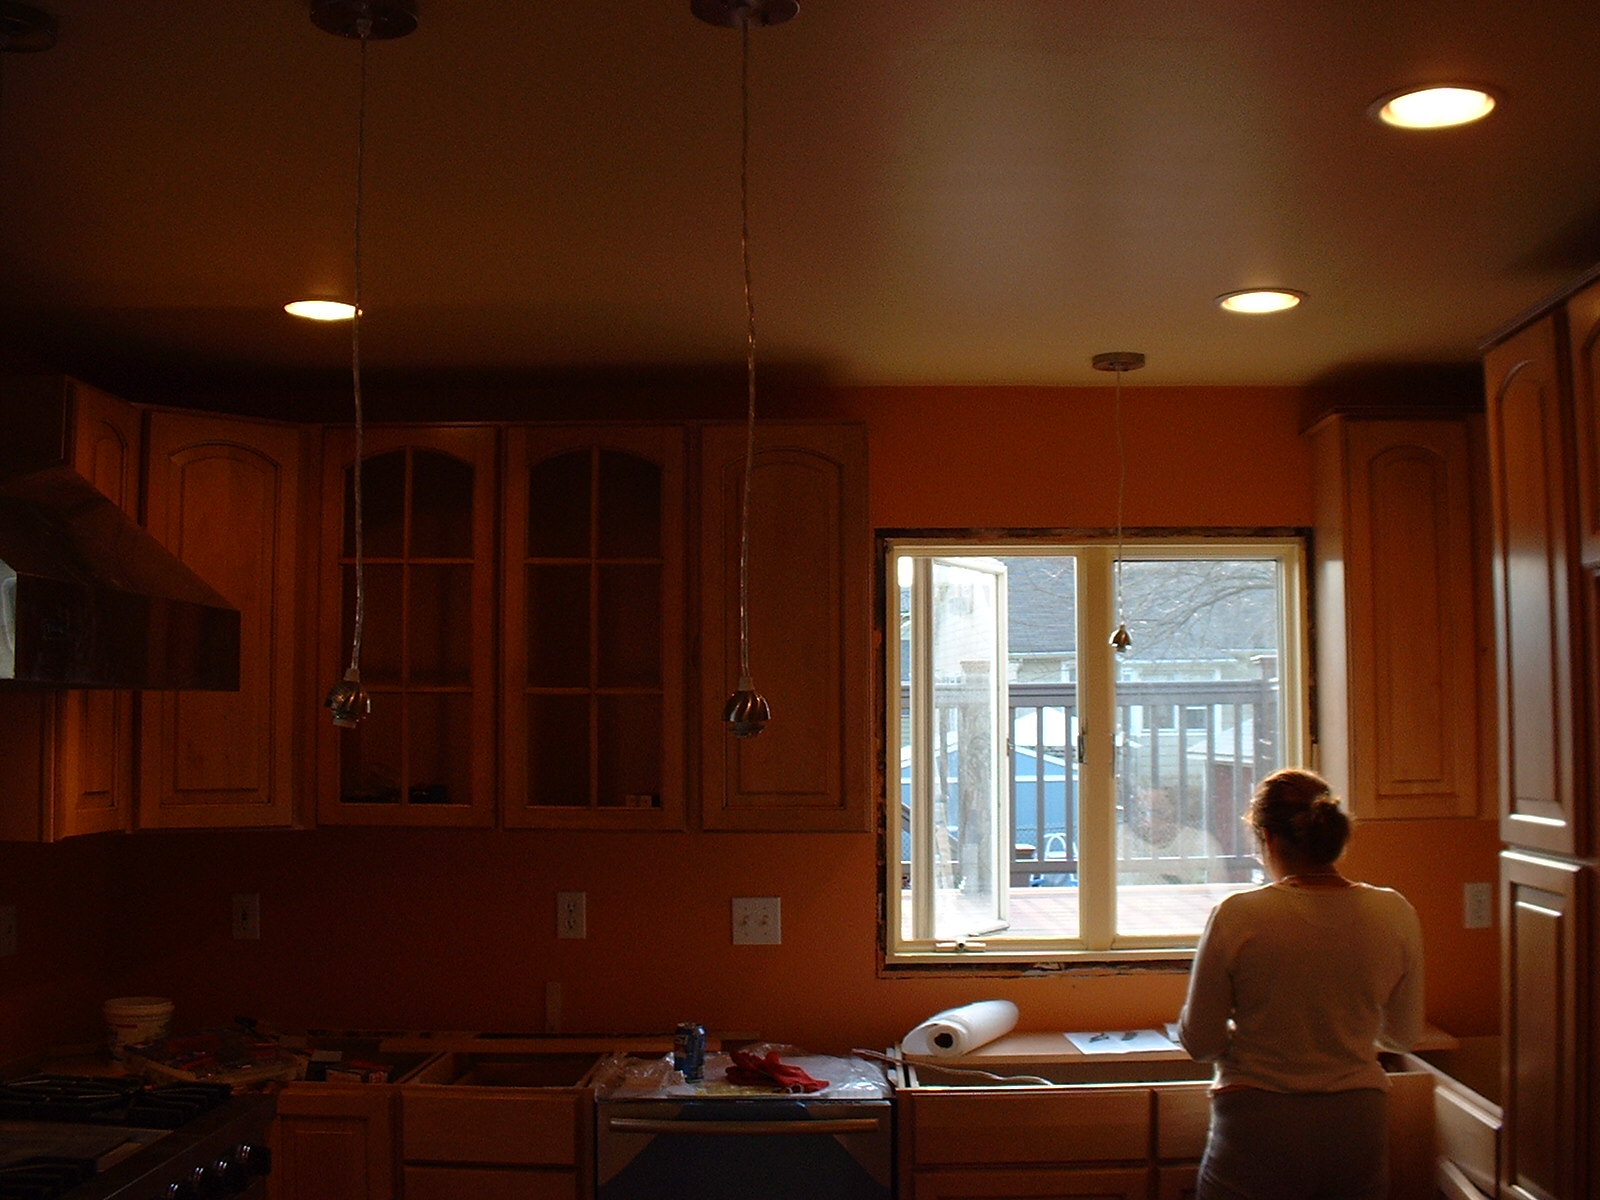 Here is Mrs. Reyes dreaming about her first cooked meal in her new kitchen.